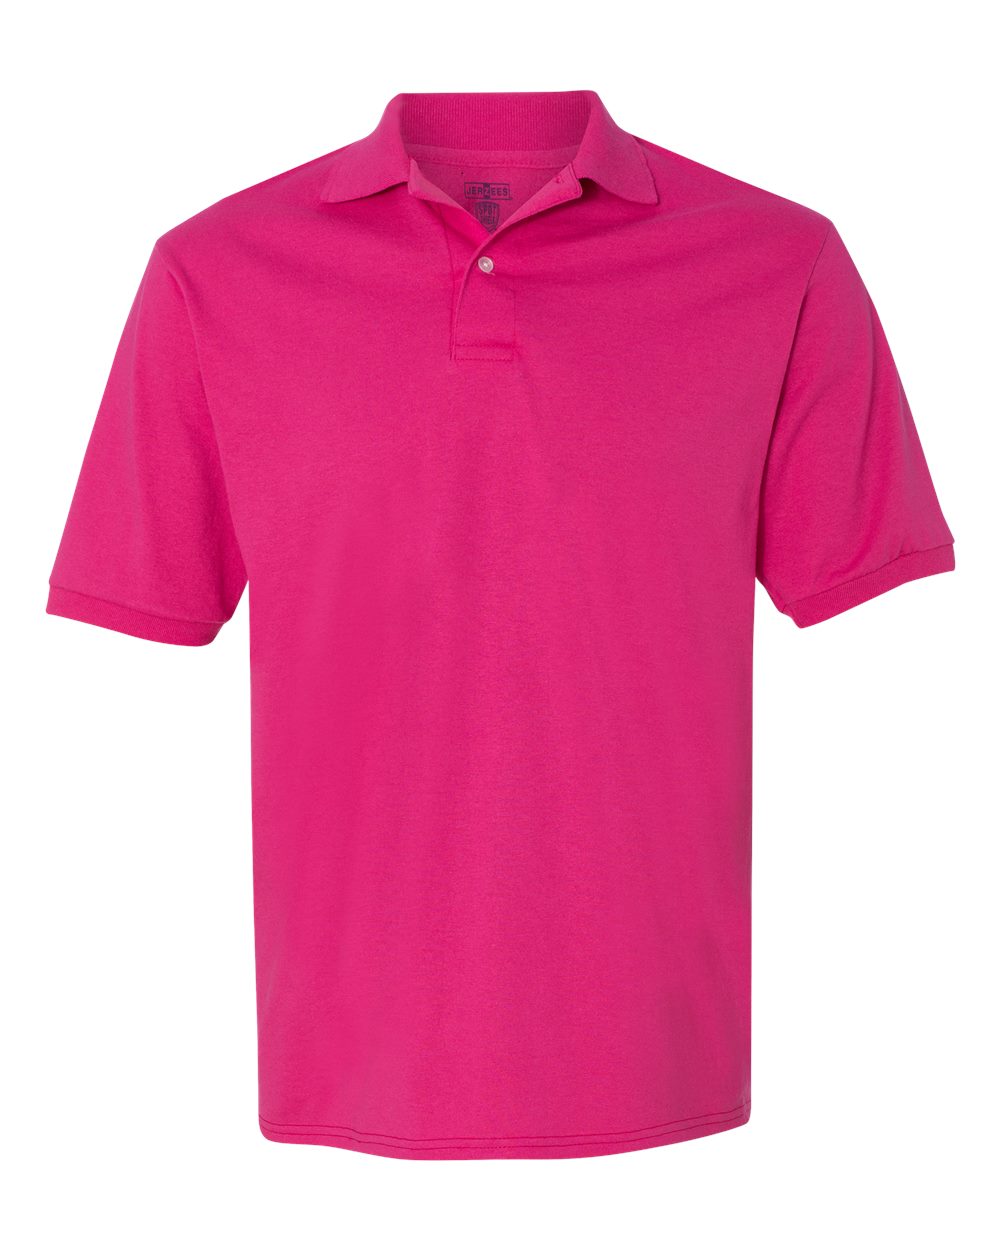 jerzees 50/50 polo cyber pink